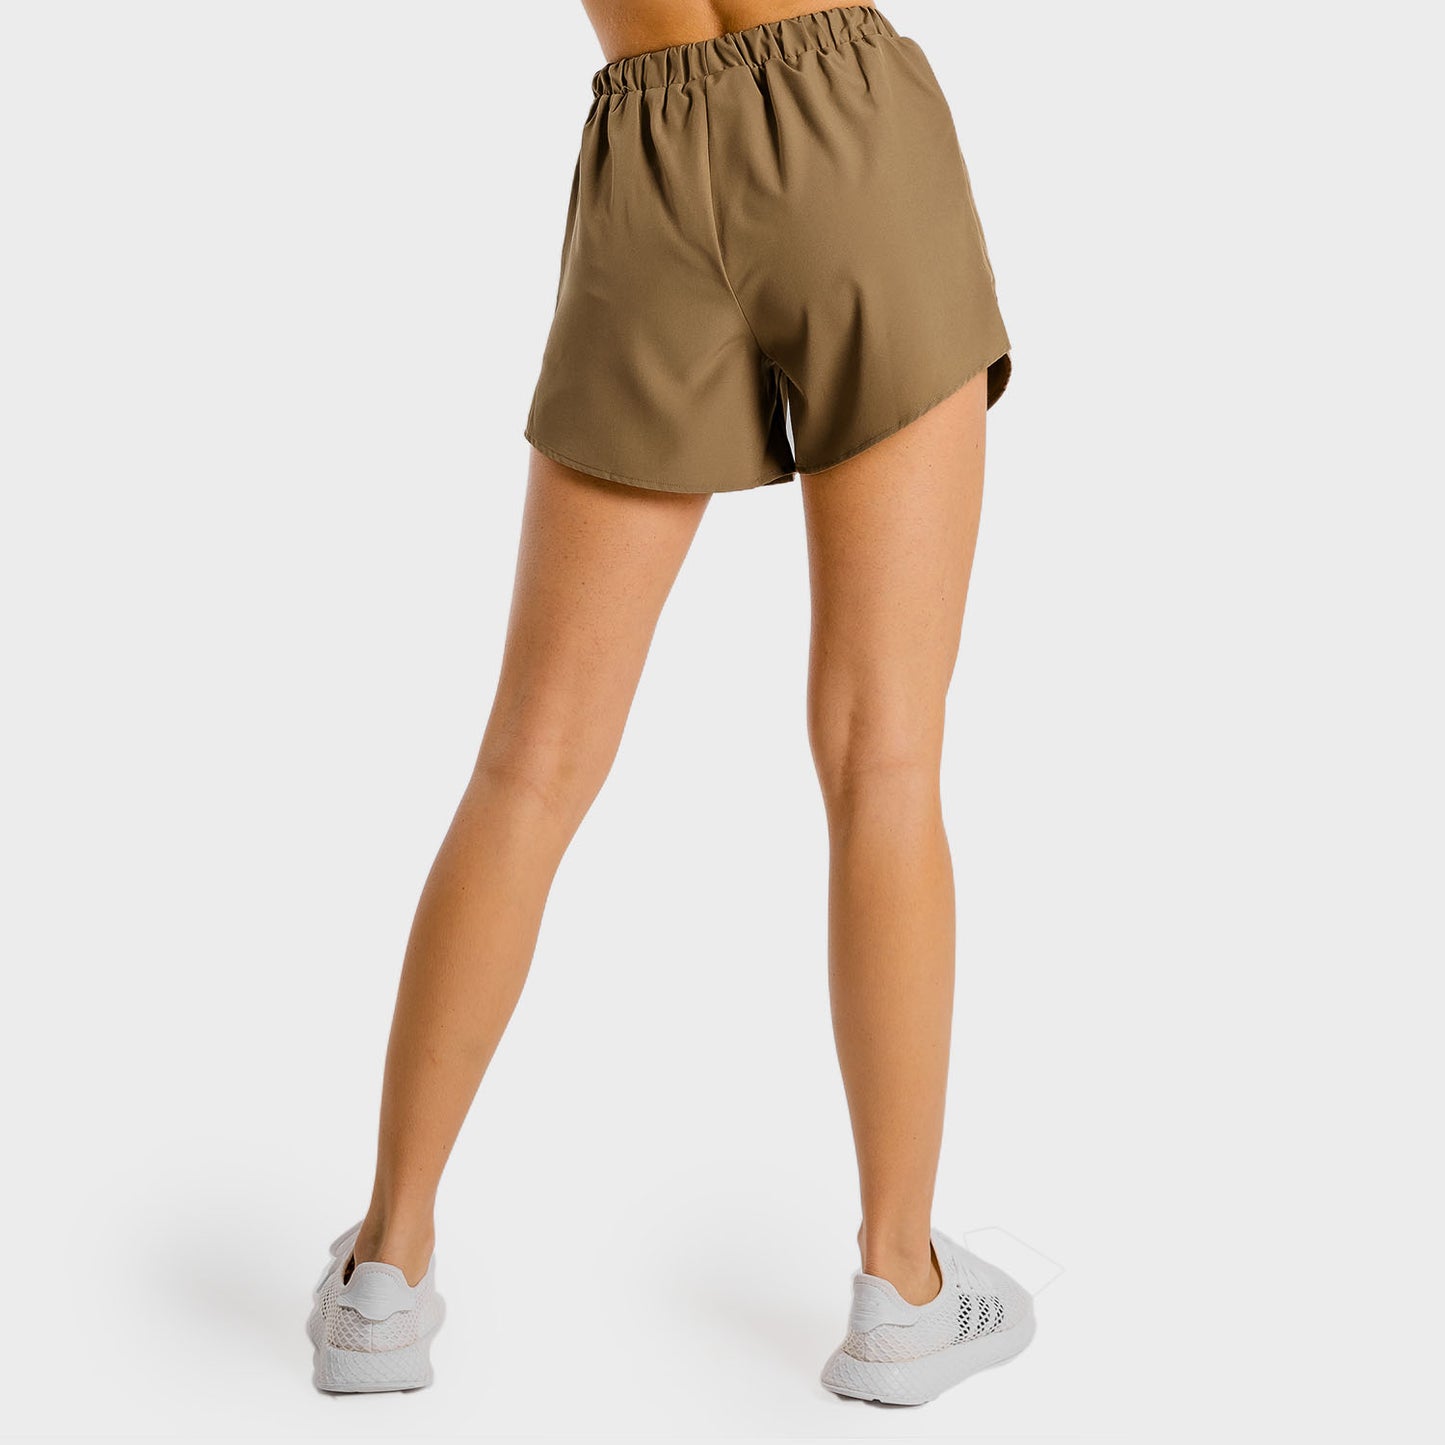 squatwolf-gym-shorts-for-women-primal-2-in-1-shorts-taupe-workout-clothes